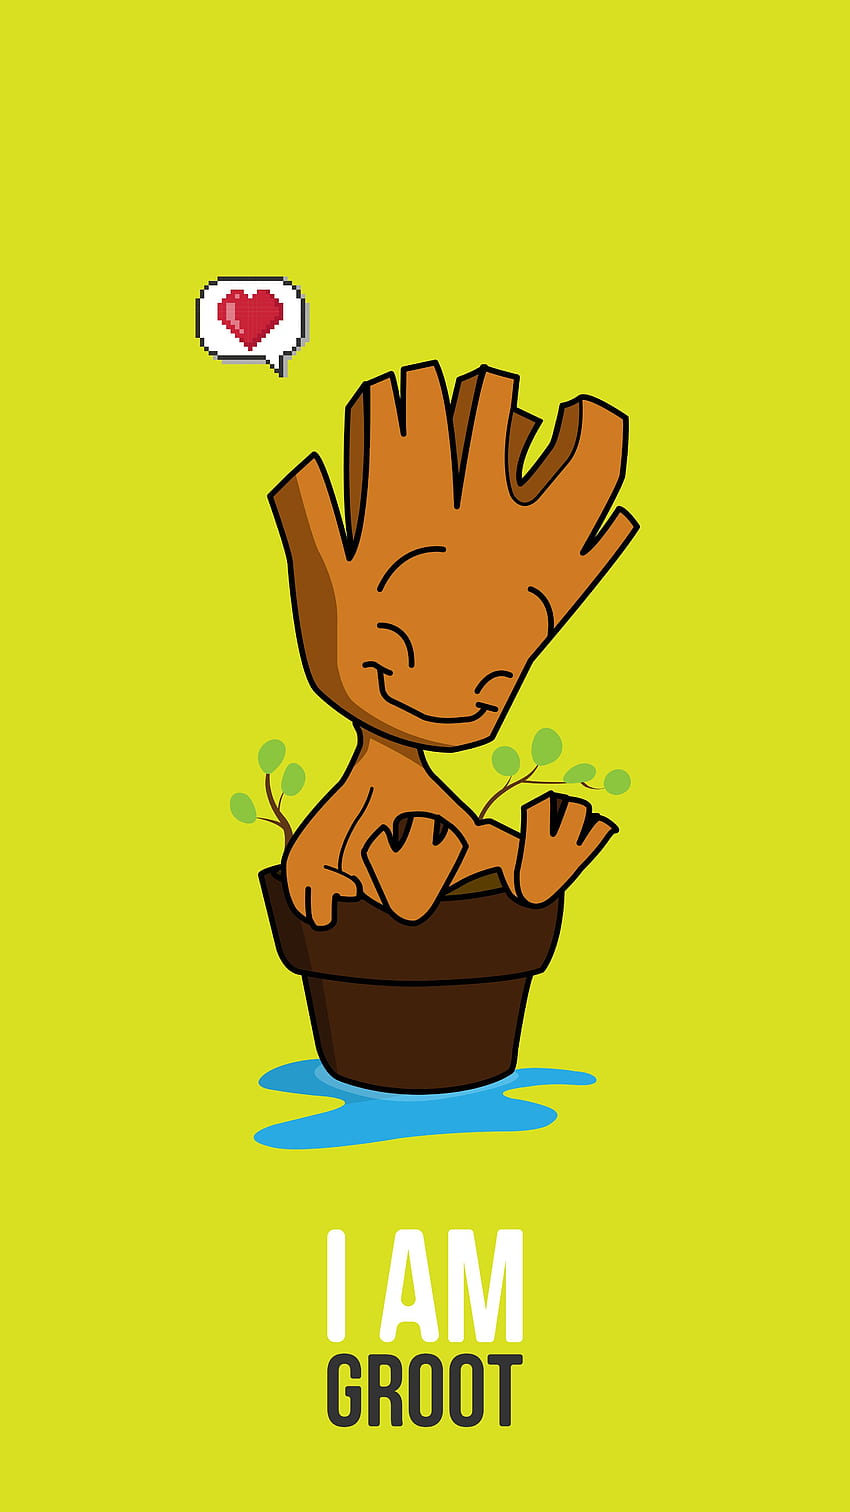 Groot - Groot For iPhone -, I AM Groot HD phone wallpaper